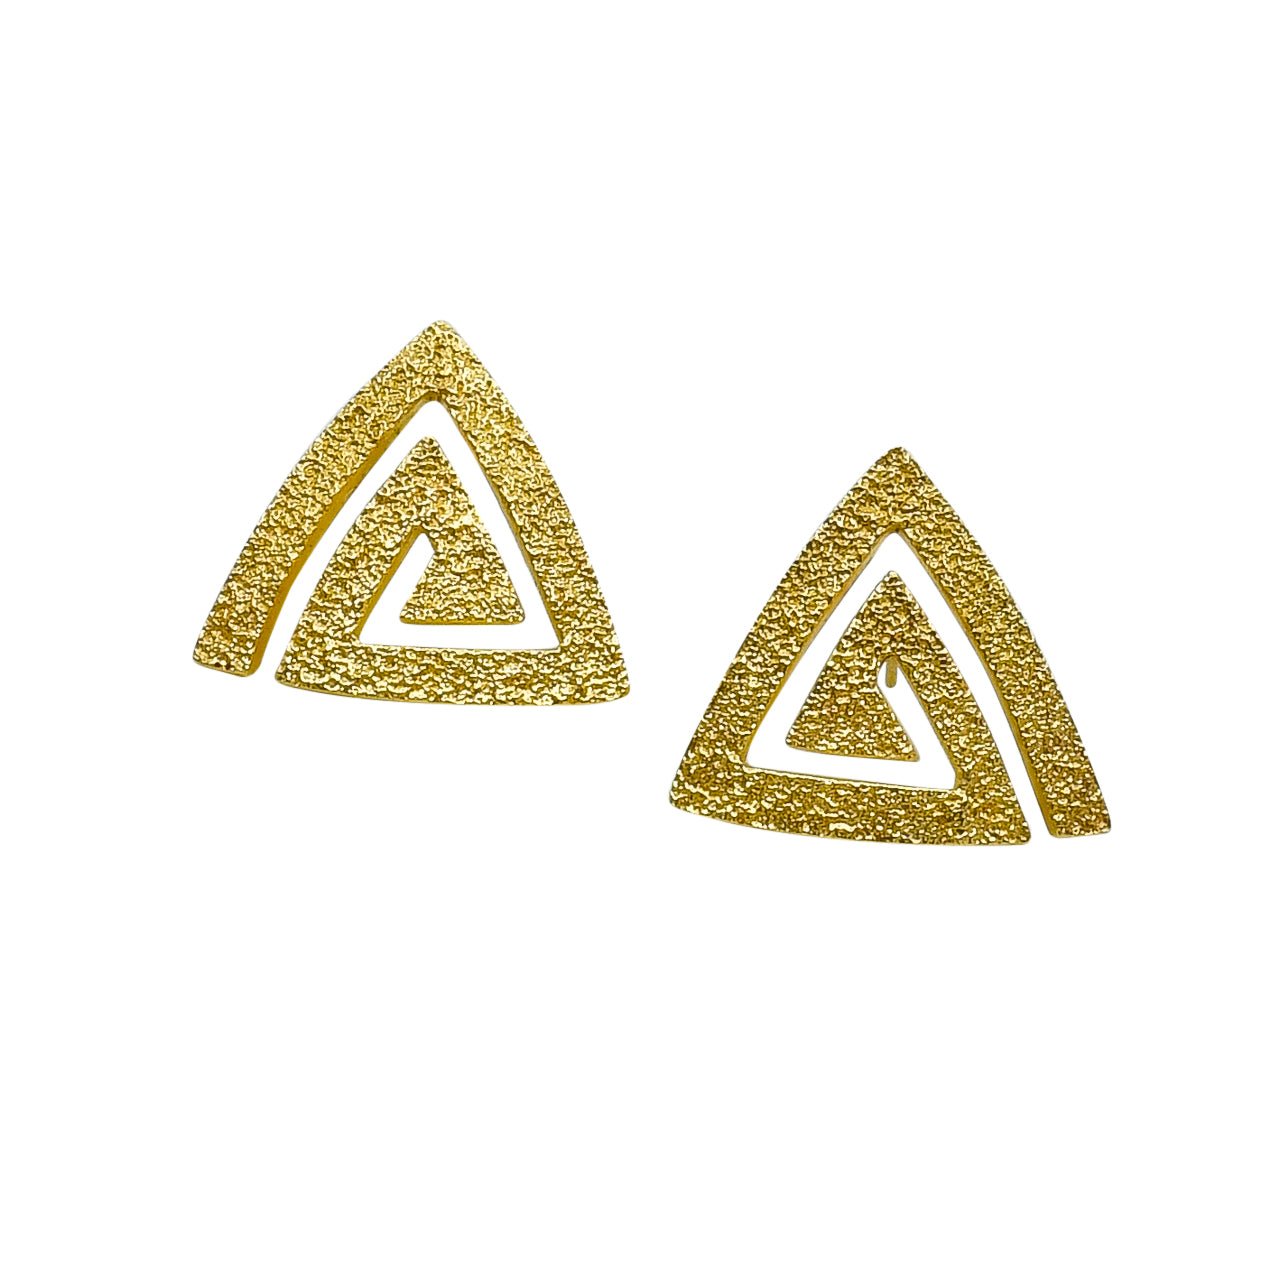 Harvey Begay Earrings of 14kt Gold Triangles - Turquoise & Tufa